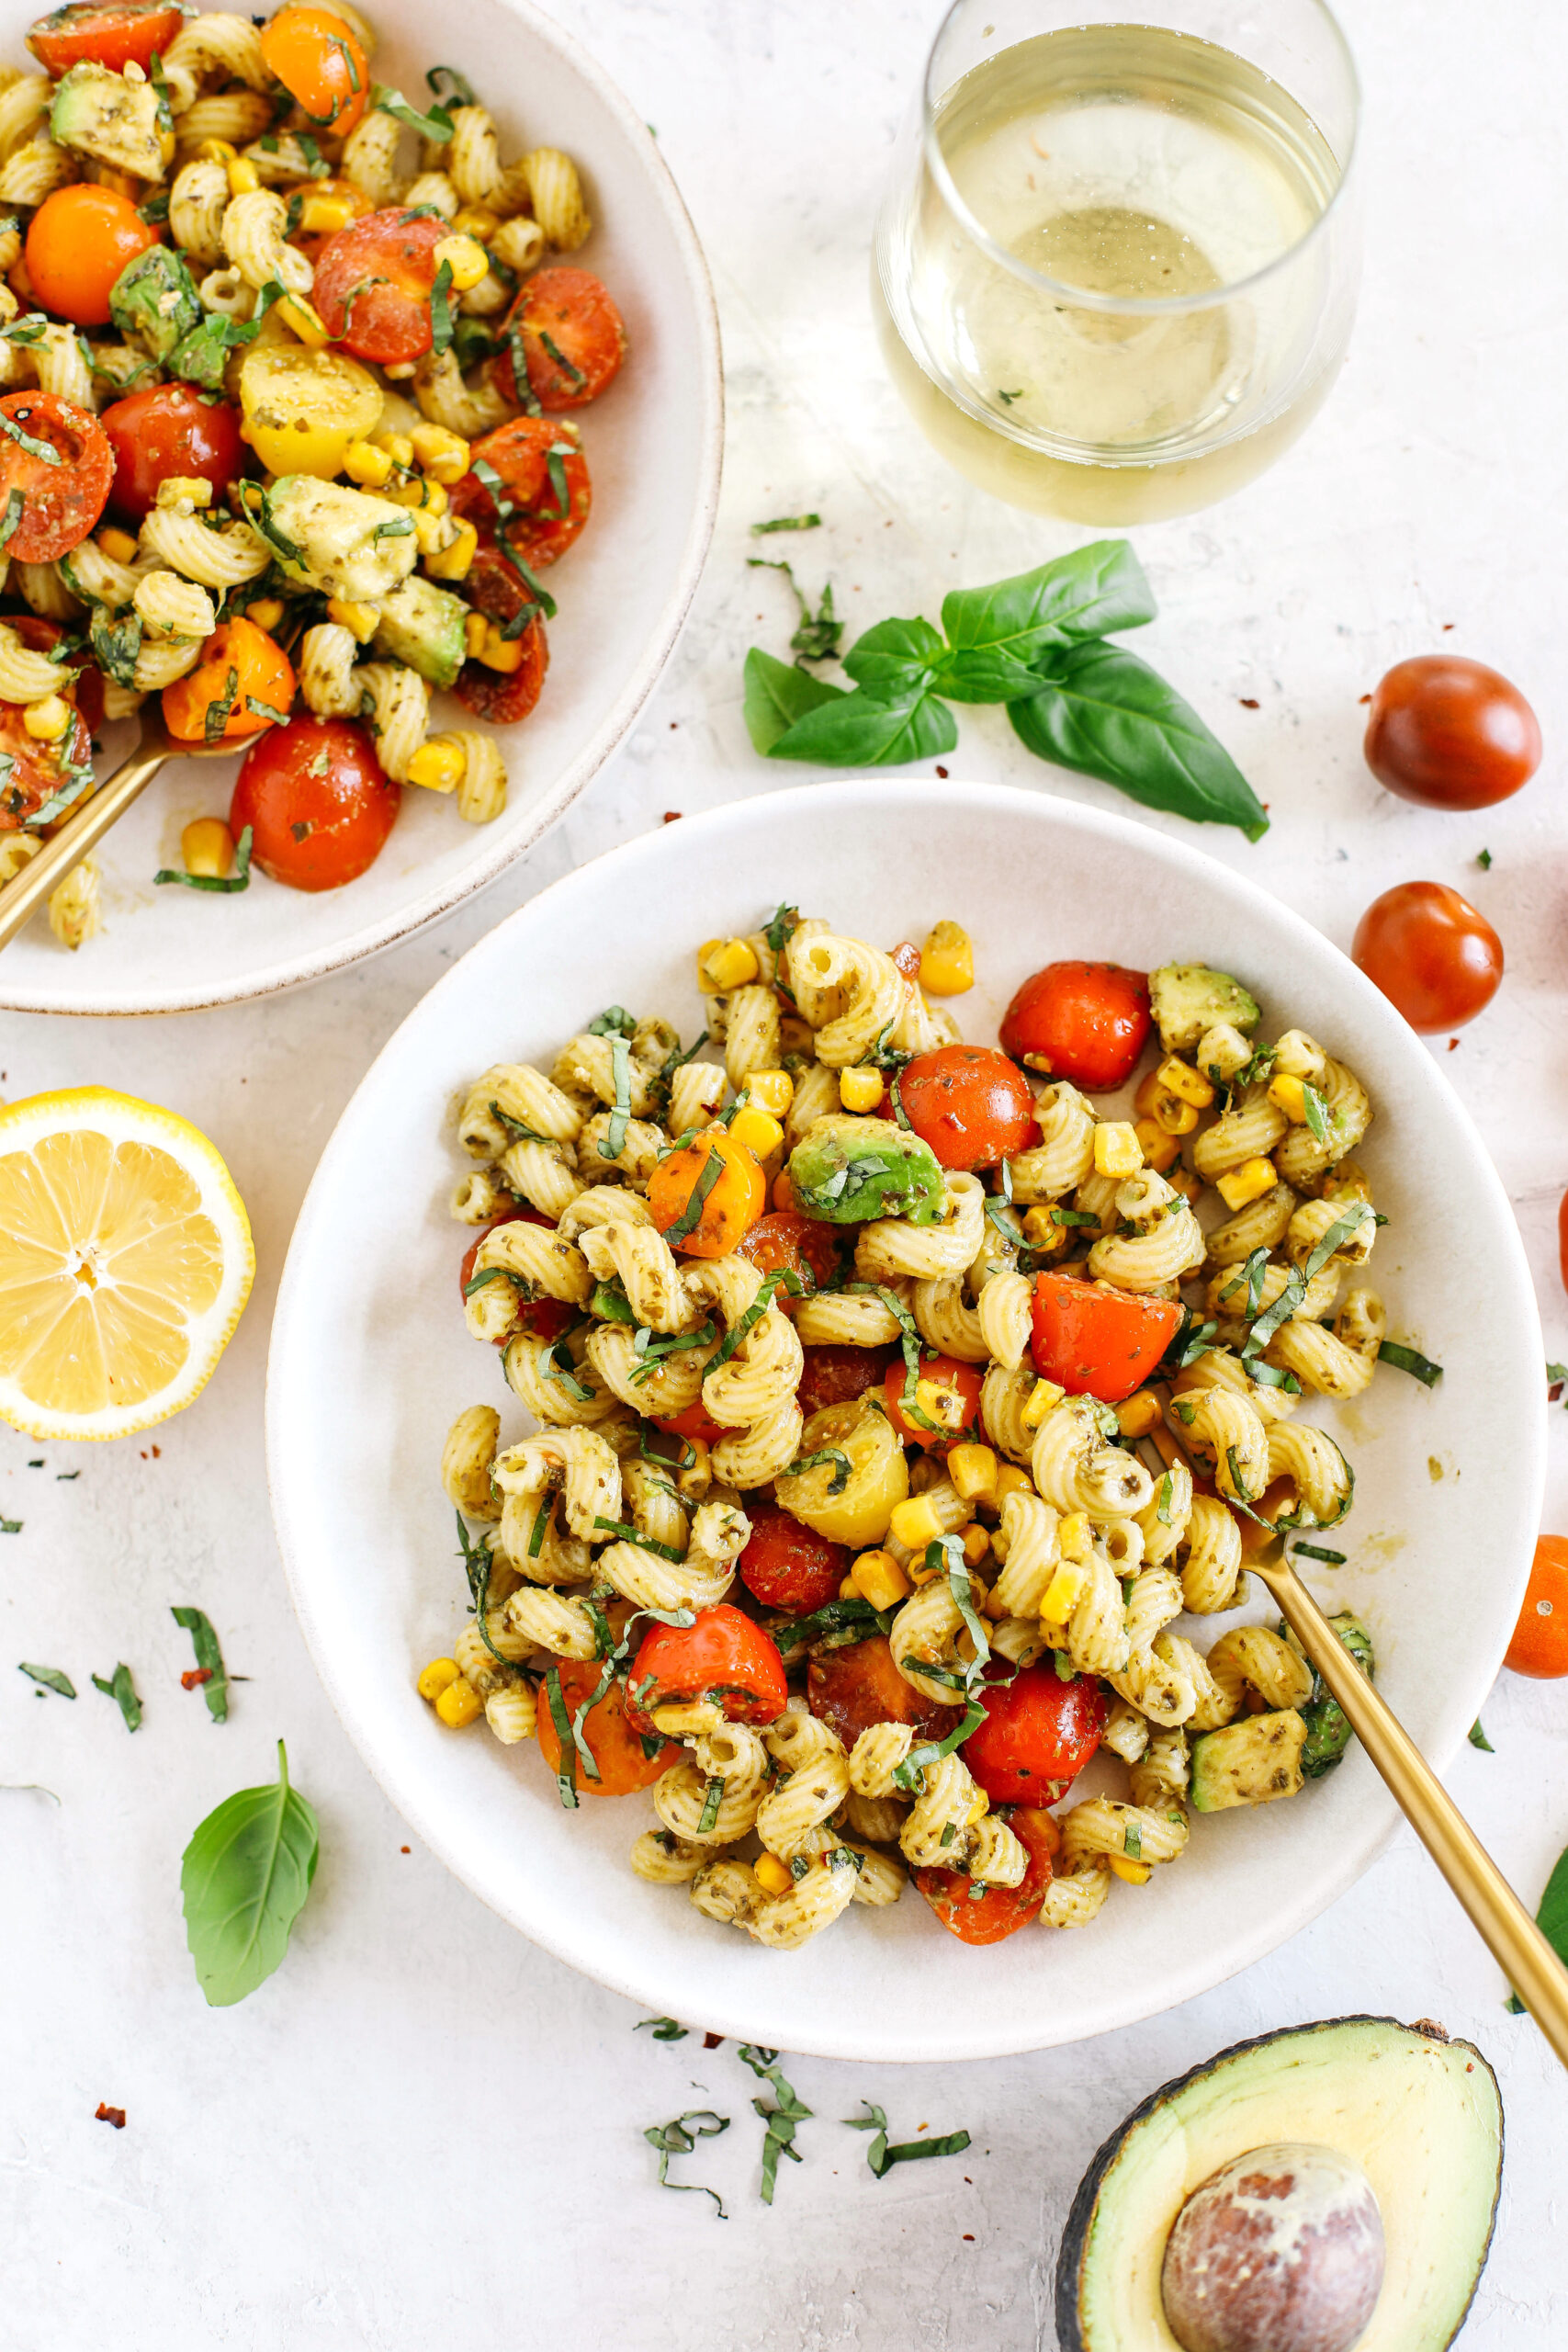 This EASY 10-minute Summer Pesto Pasta Salad is loaded with fresh ingredients like juicy tomatoes, corn, avocado, garlic, and lemon zest, all tossed together with warm pasta and delicious basil pesto!